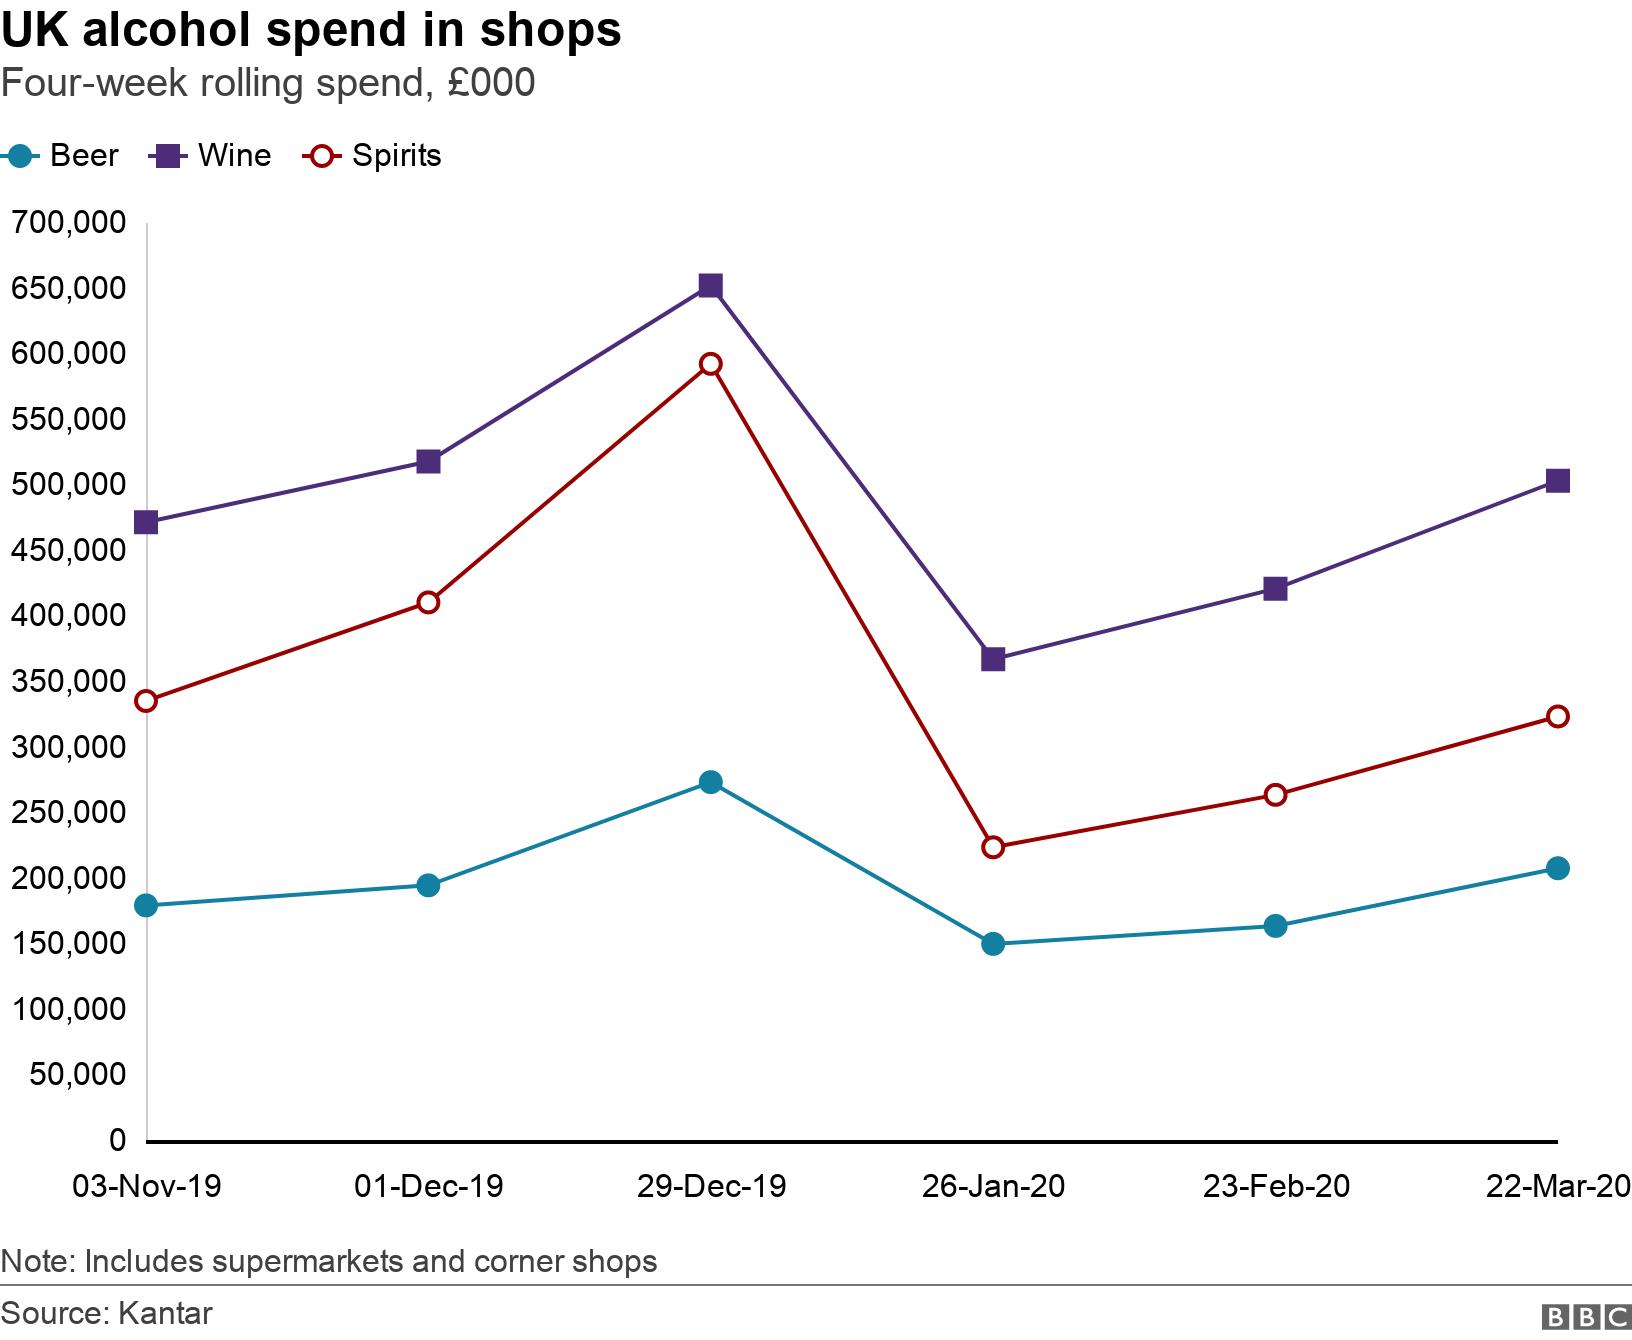 UK alcohol spend in shops. Four-week rolling spend, £000. UK alcohol sales in shops Note: Includes supermarkets and corner shops.